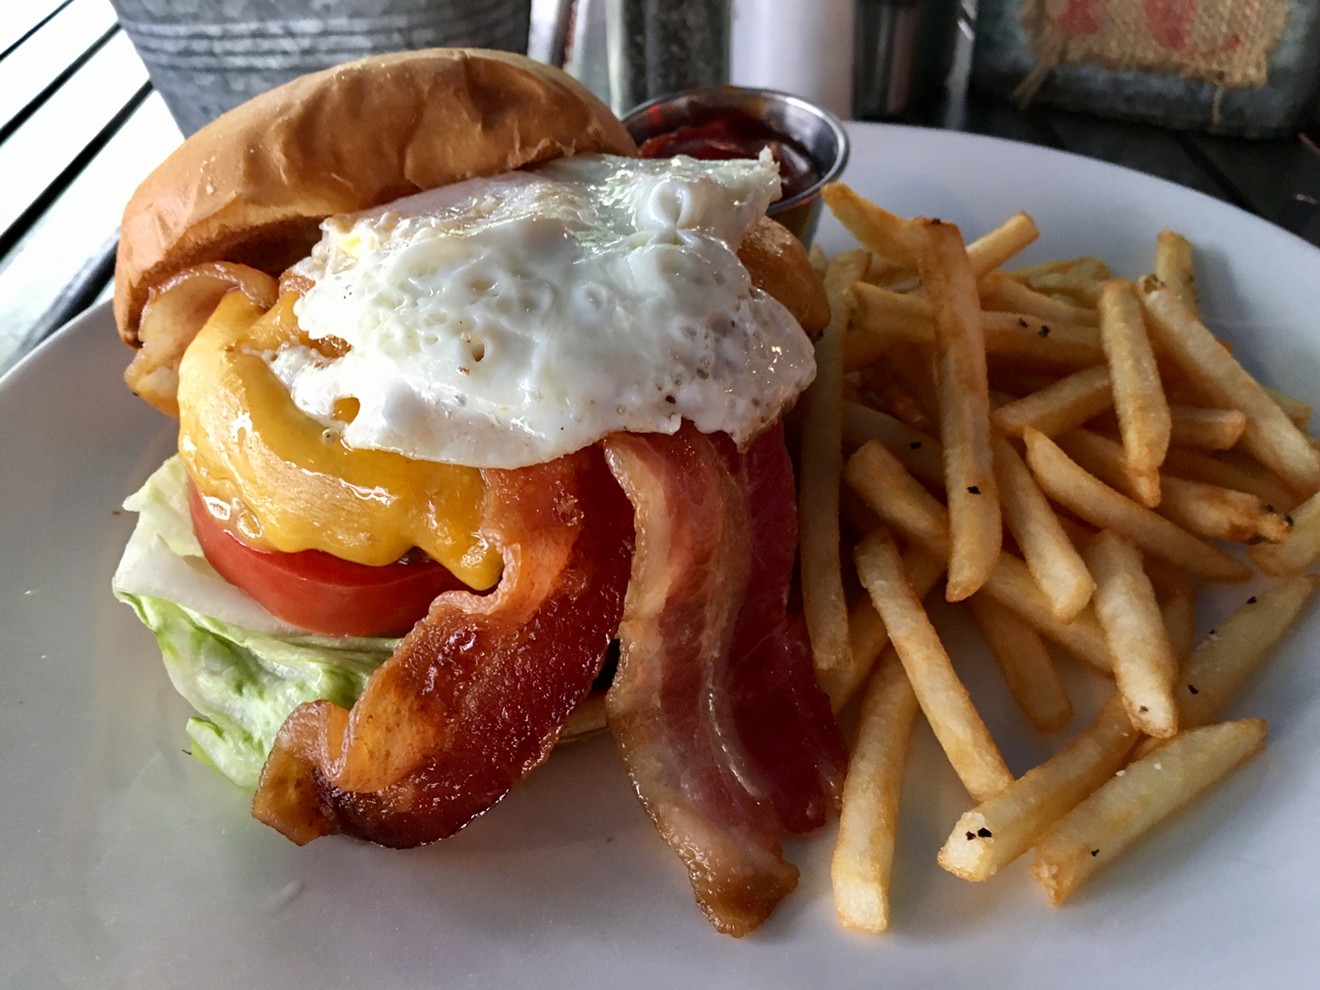 The cheddar-blanketed Egg Burger at Fat Chicken is $12.